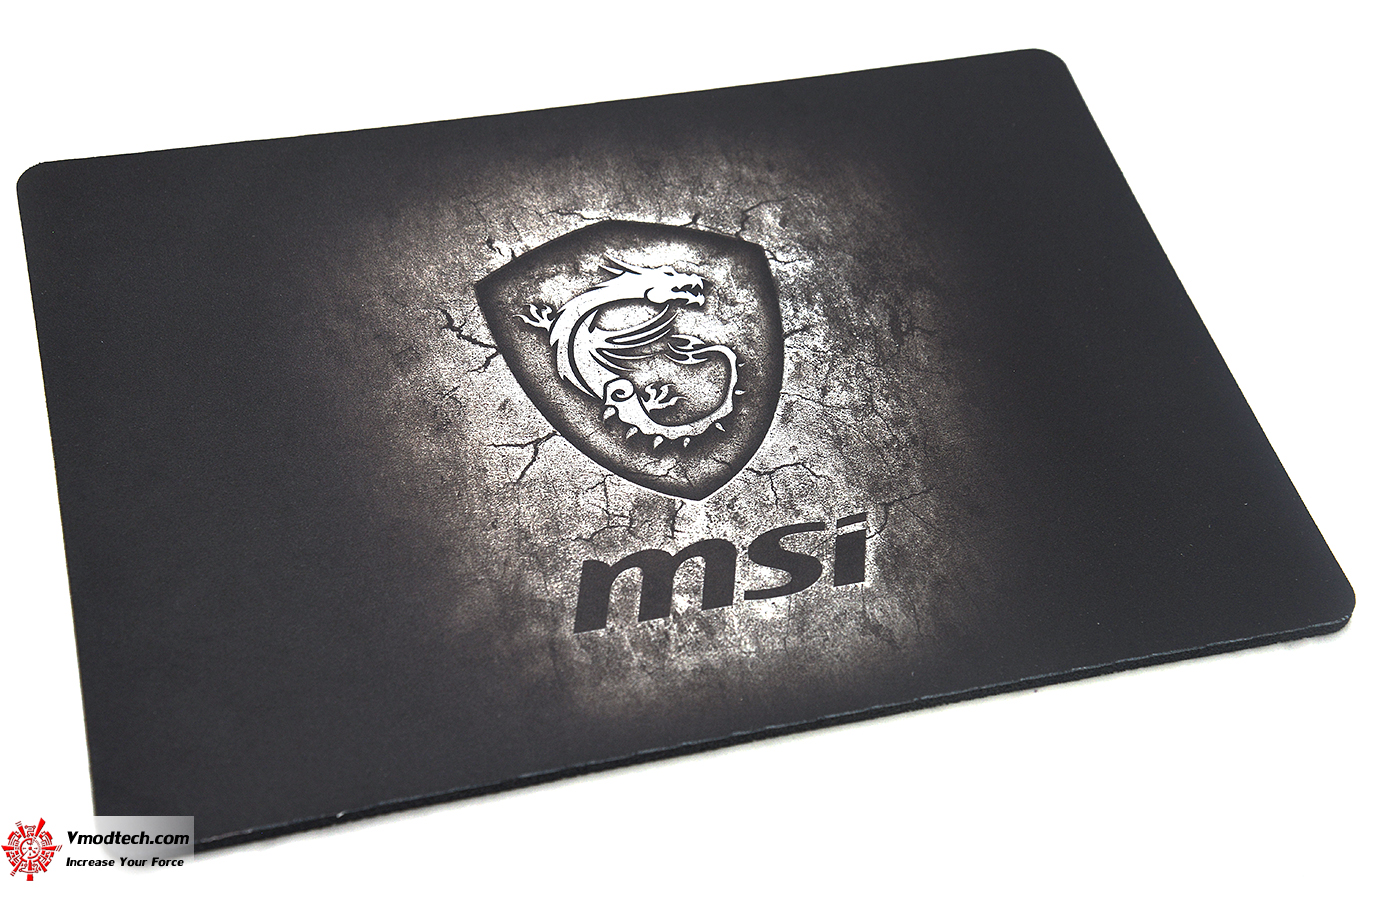 dsc 5045 MSI AGILITY GD20 GAMING MOUSEPAD REVIEW